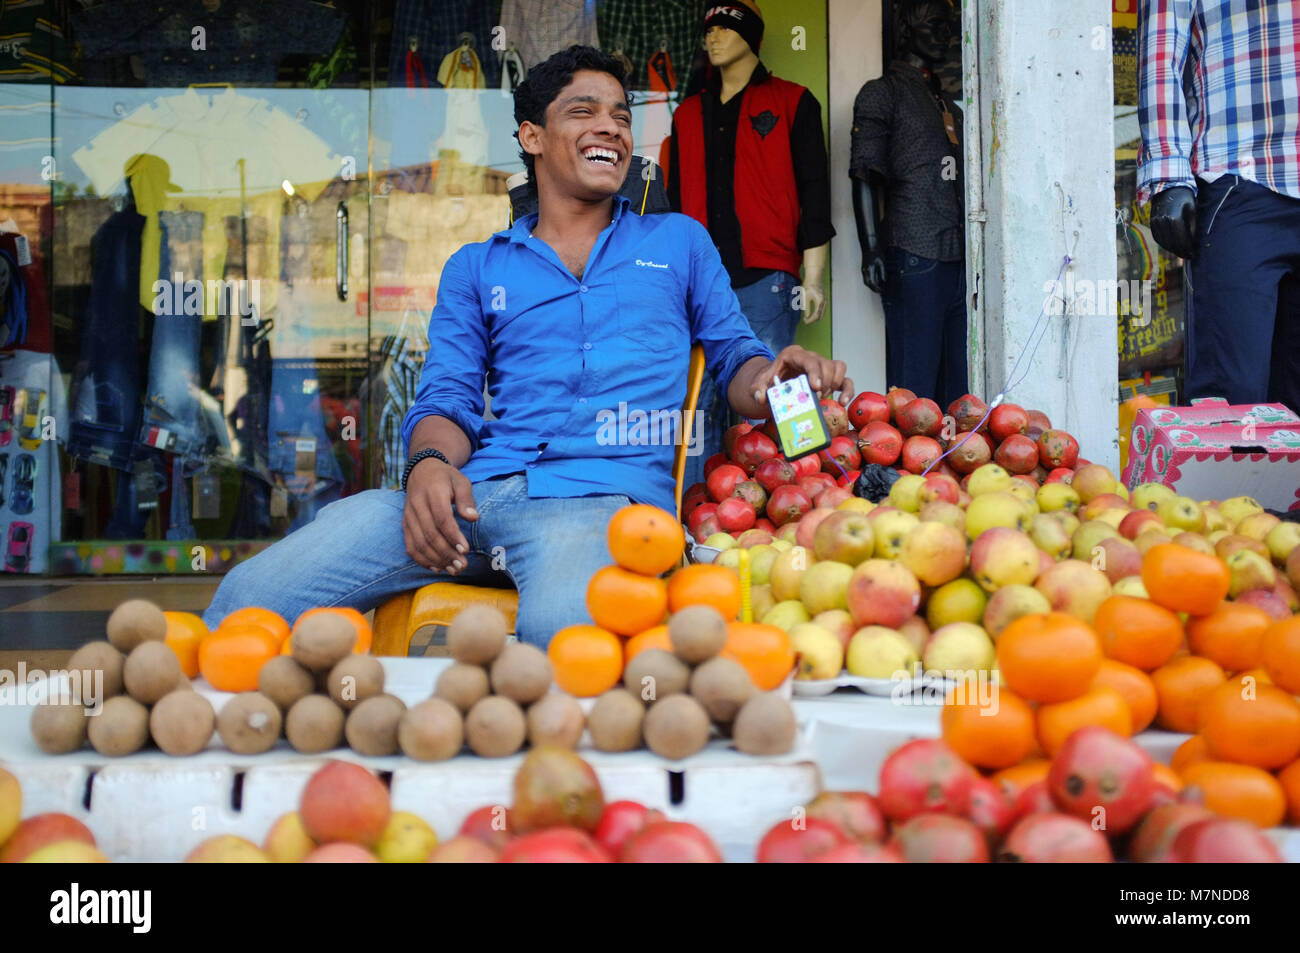 GOA, INDIA - JANUARY 27, 2015: Street fruit vendor sitting and laughing at fruit stand. Stock Photo